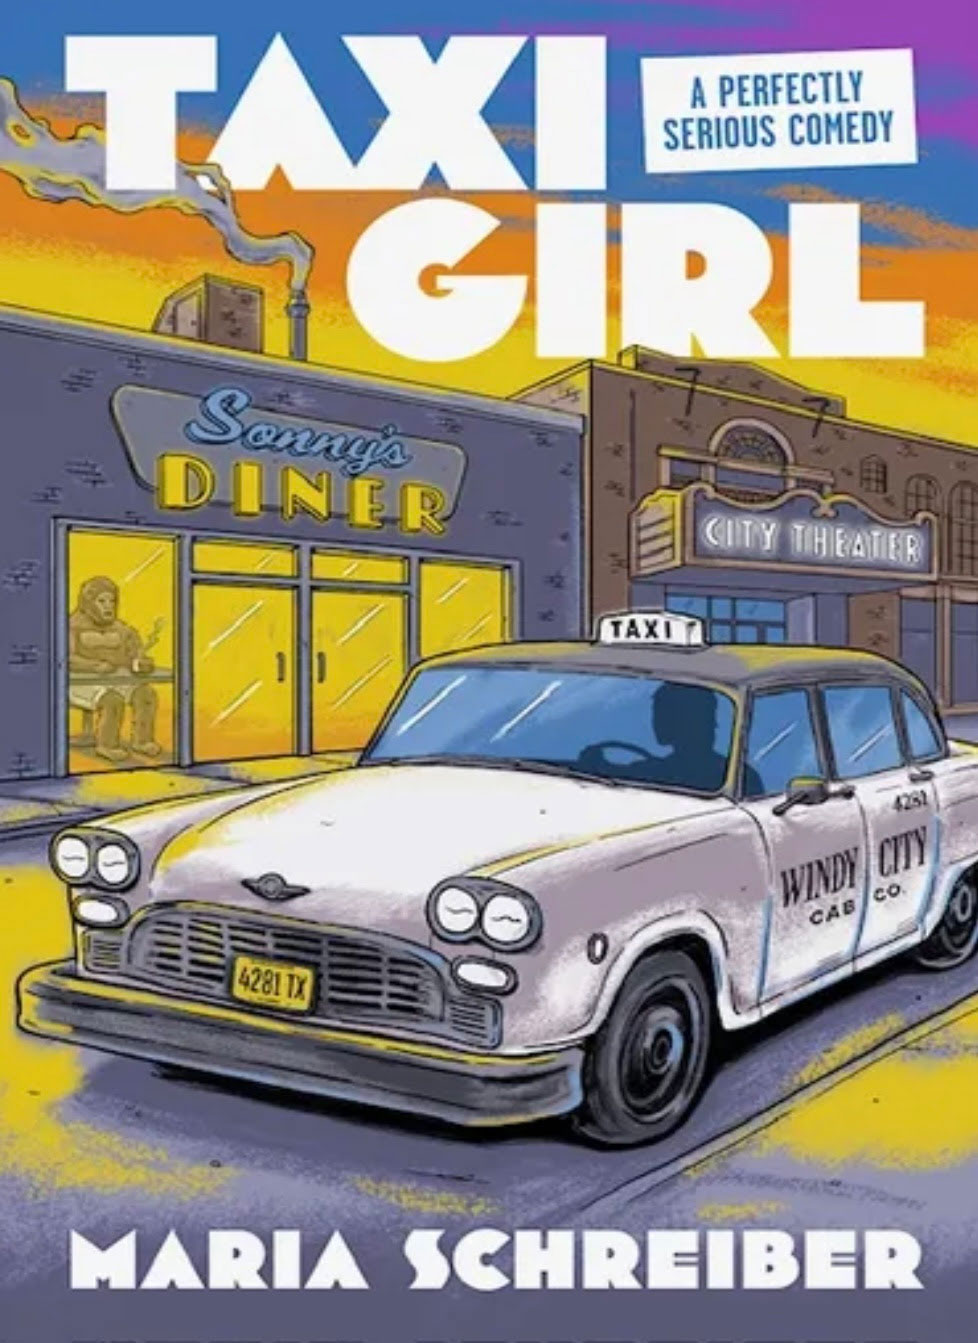 The cover of Taxi Girl by Maria Schreiber